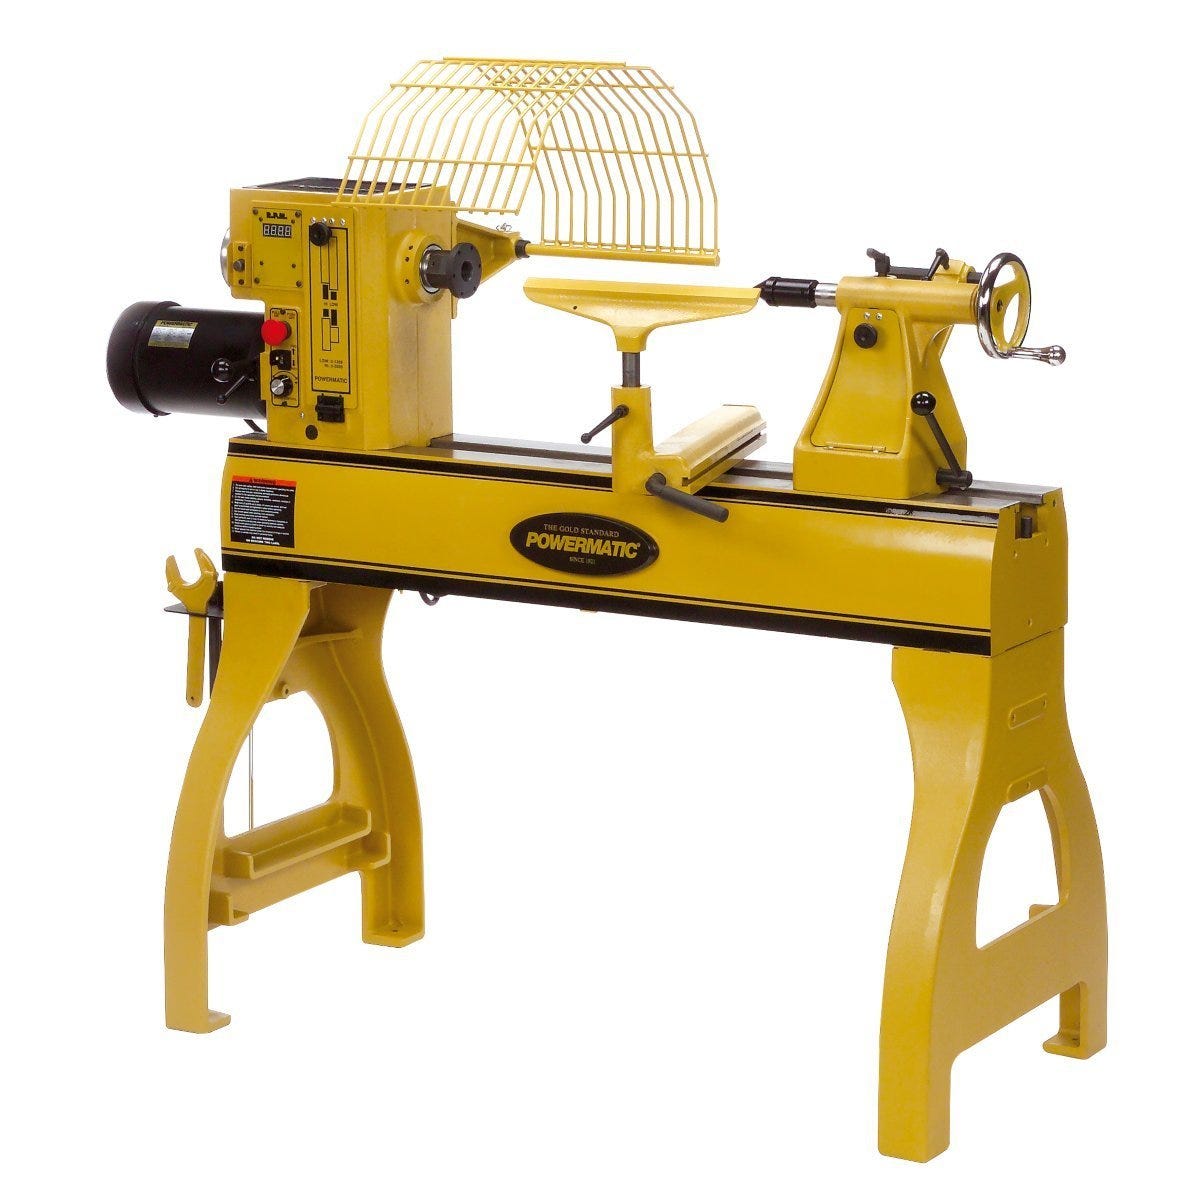 Advantages and safety when working with wood lathe 